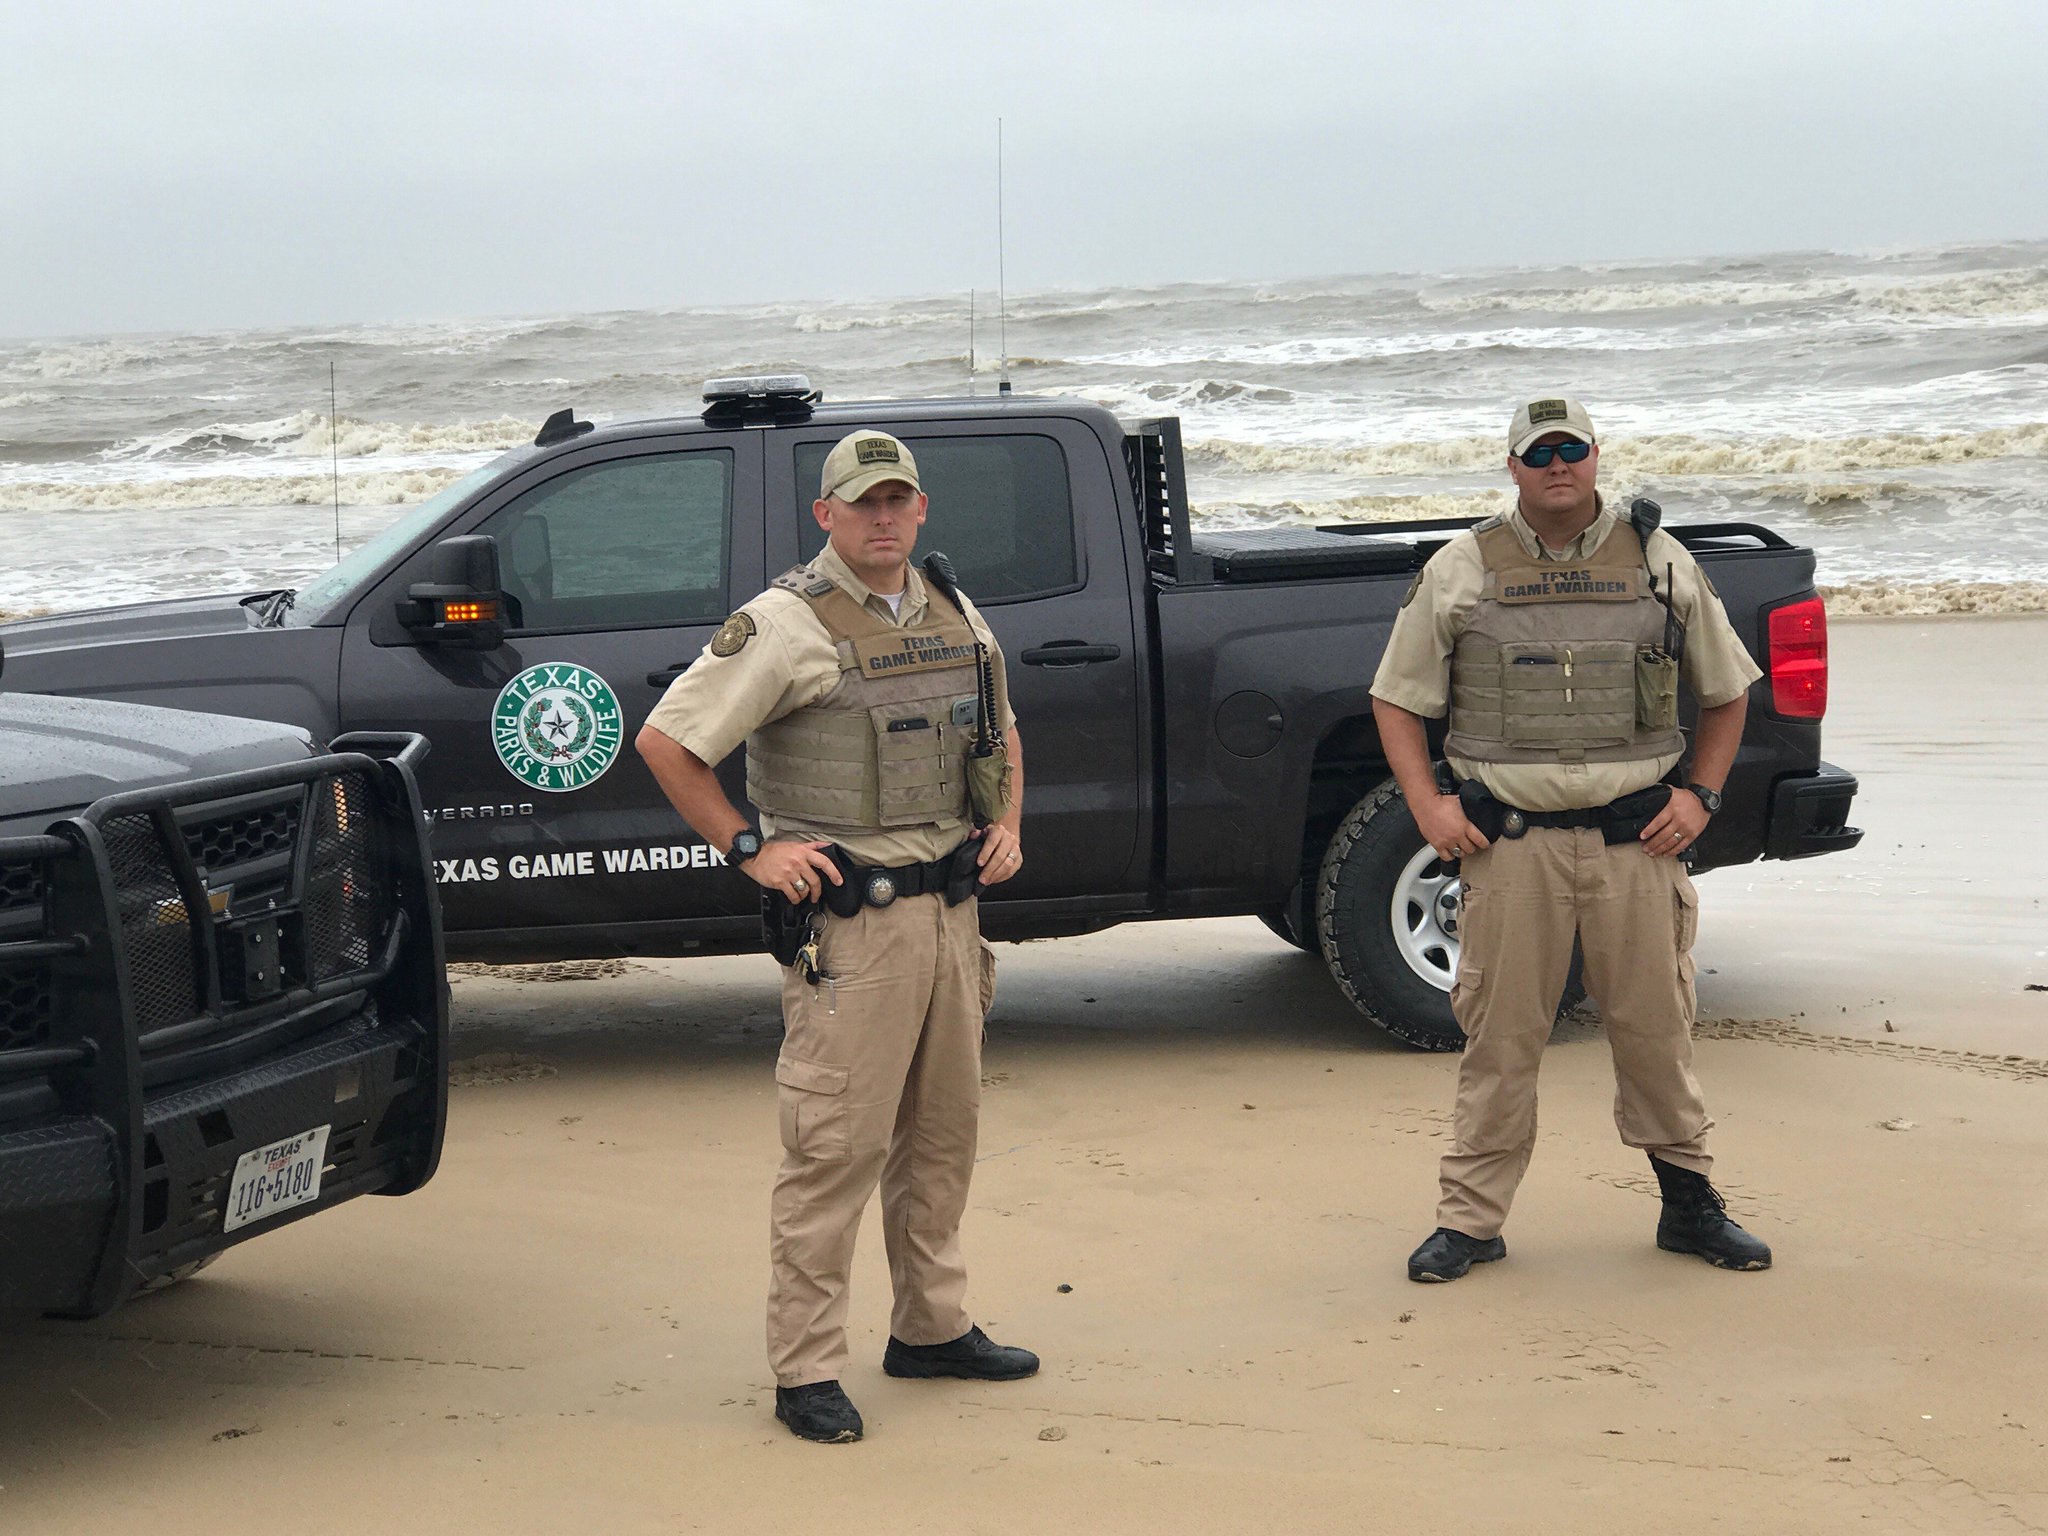 Texas Game Warden on Twitter: "Your @TexasGameWarden is standing by to